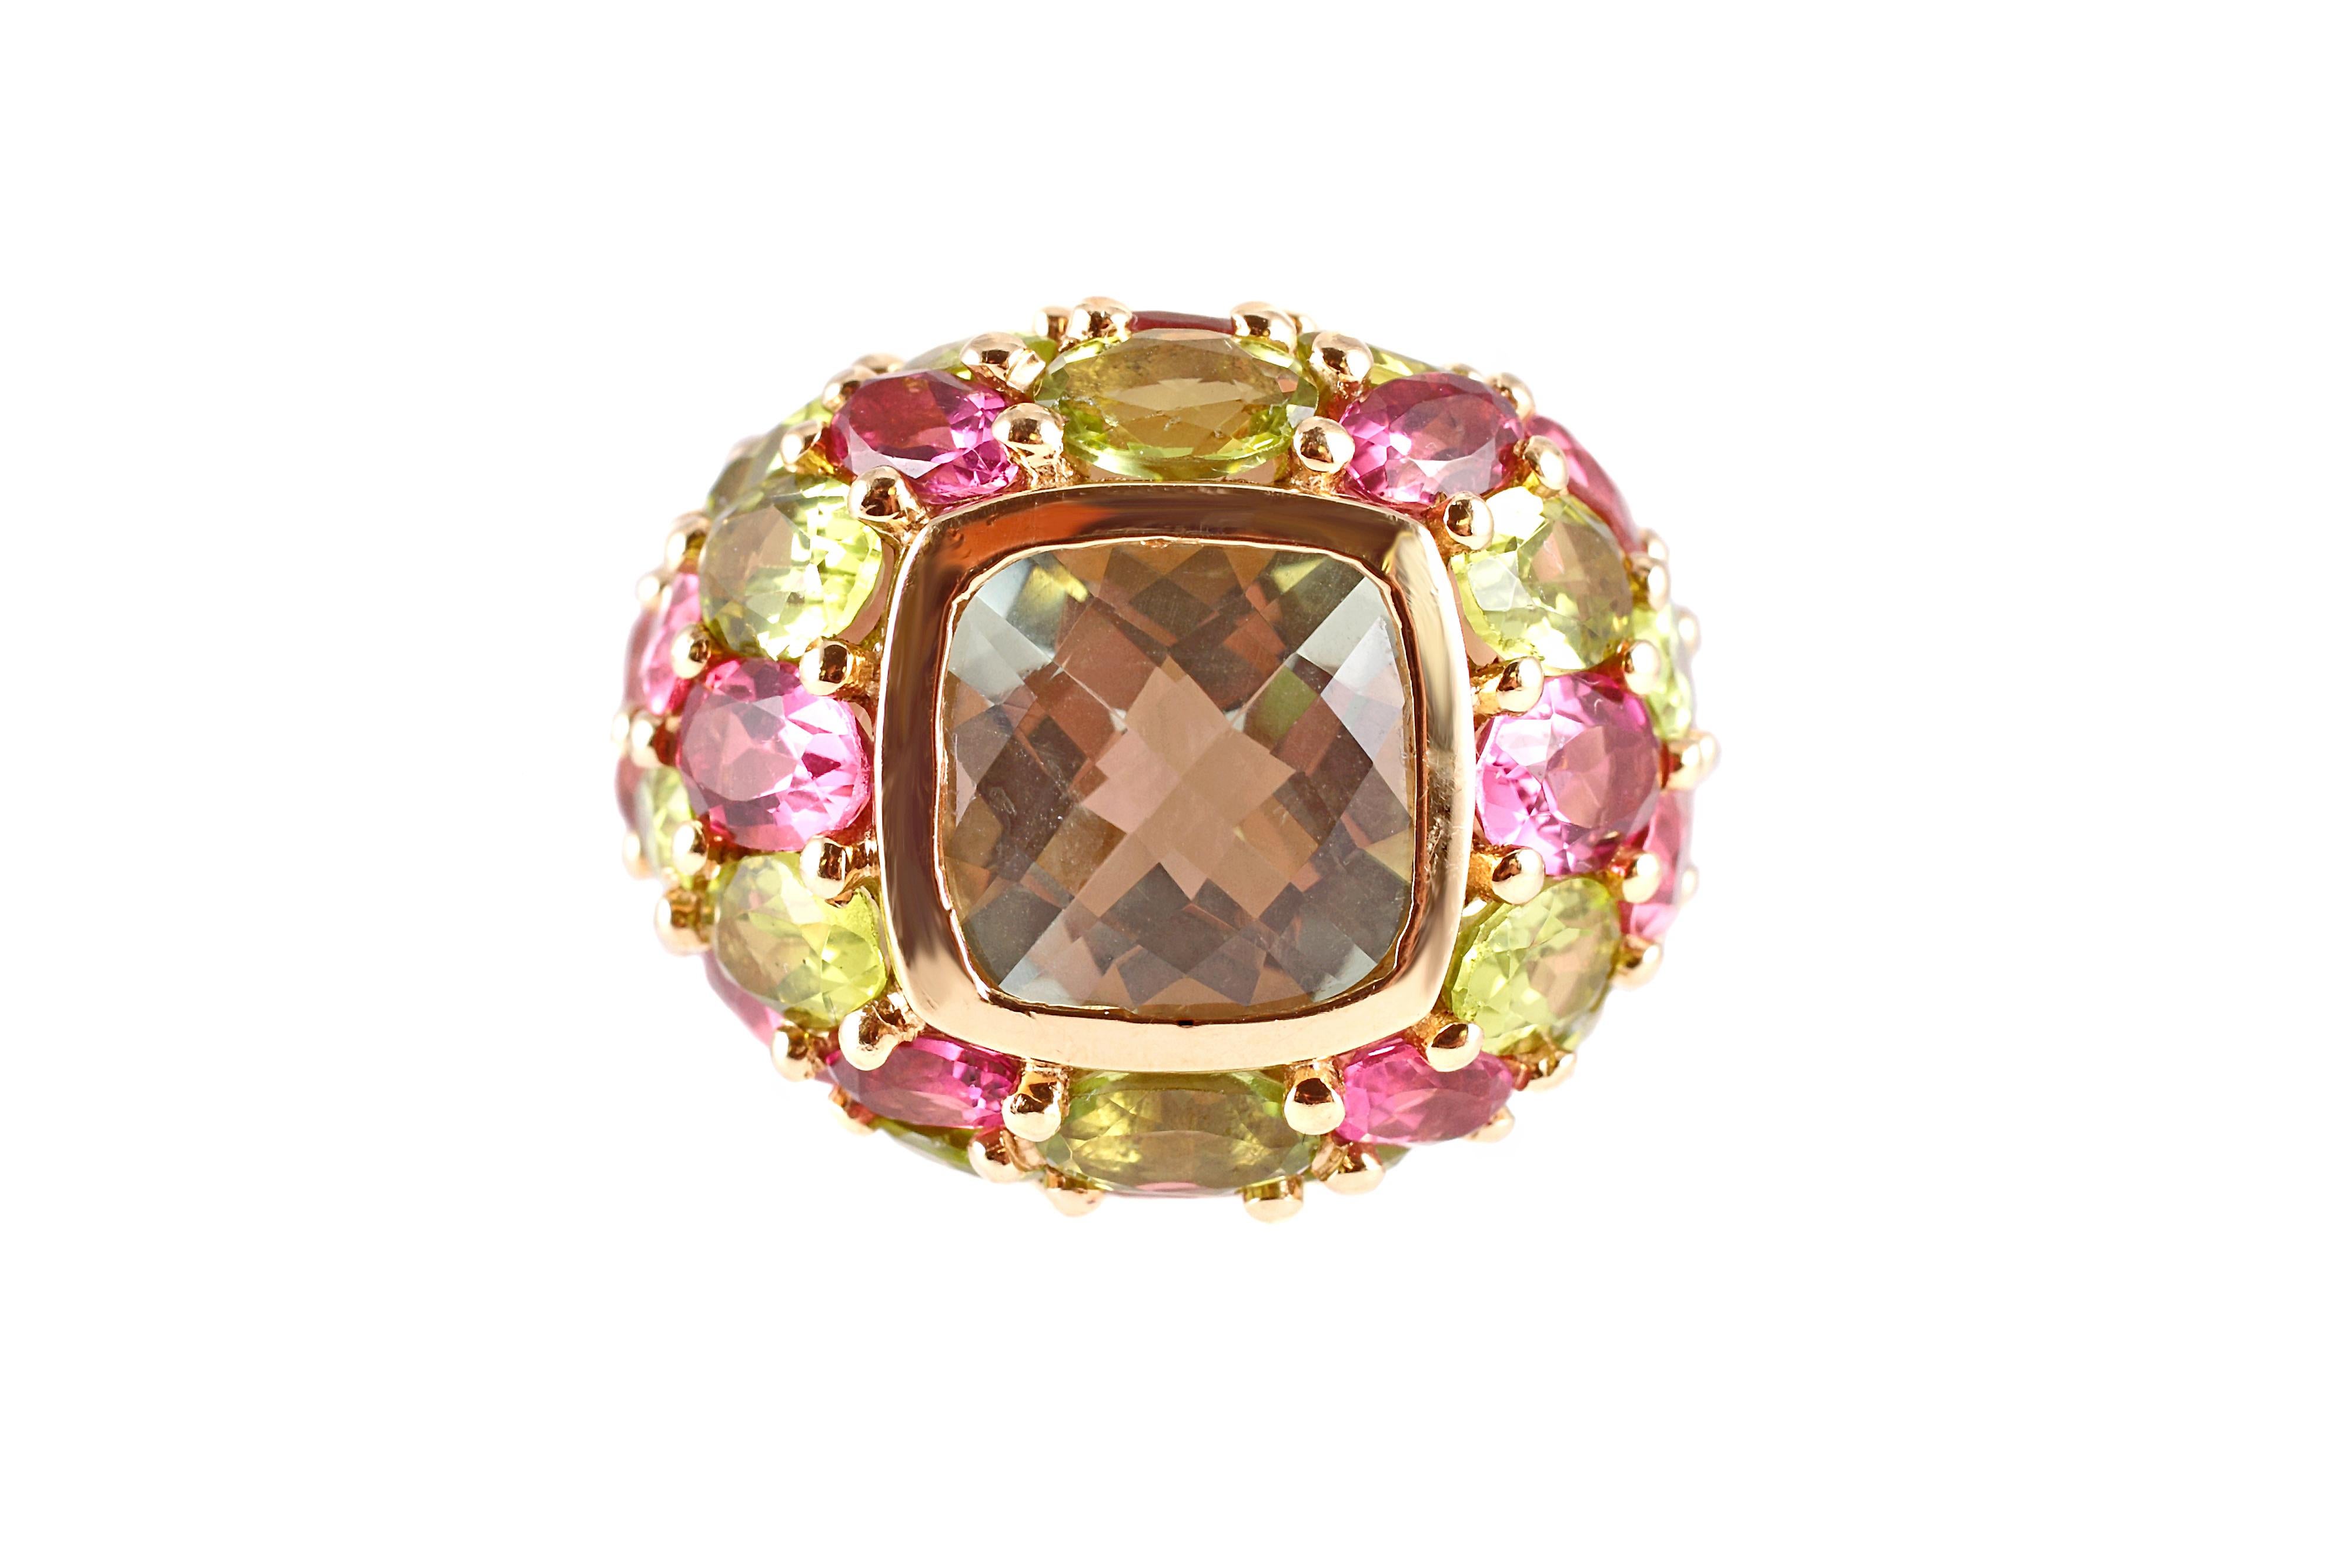 In a size 7 1/2 - this charming ring is in 14 karat yellow gold and features popping quartz, tourmaline and peridot stones. 